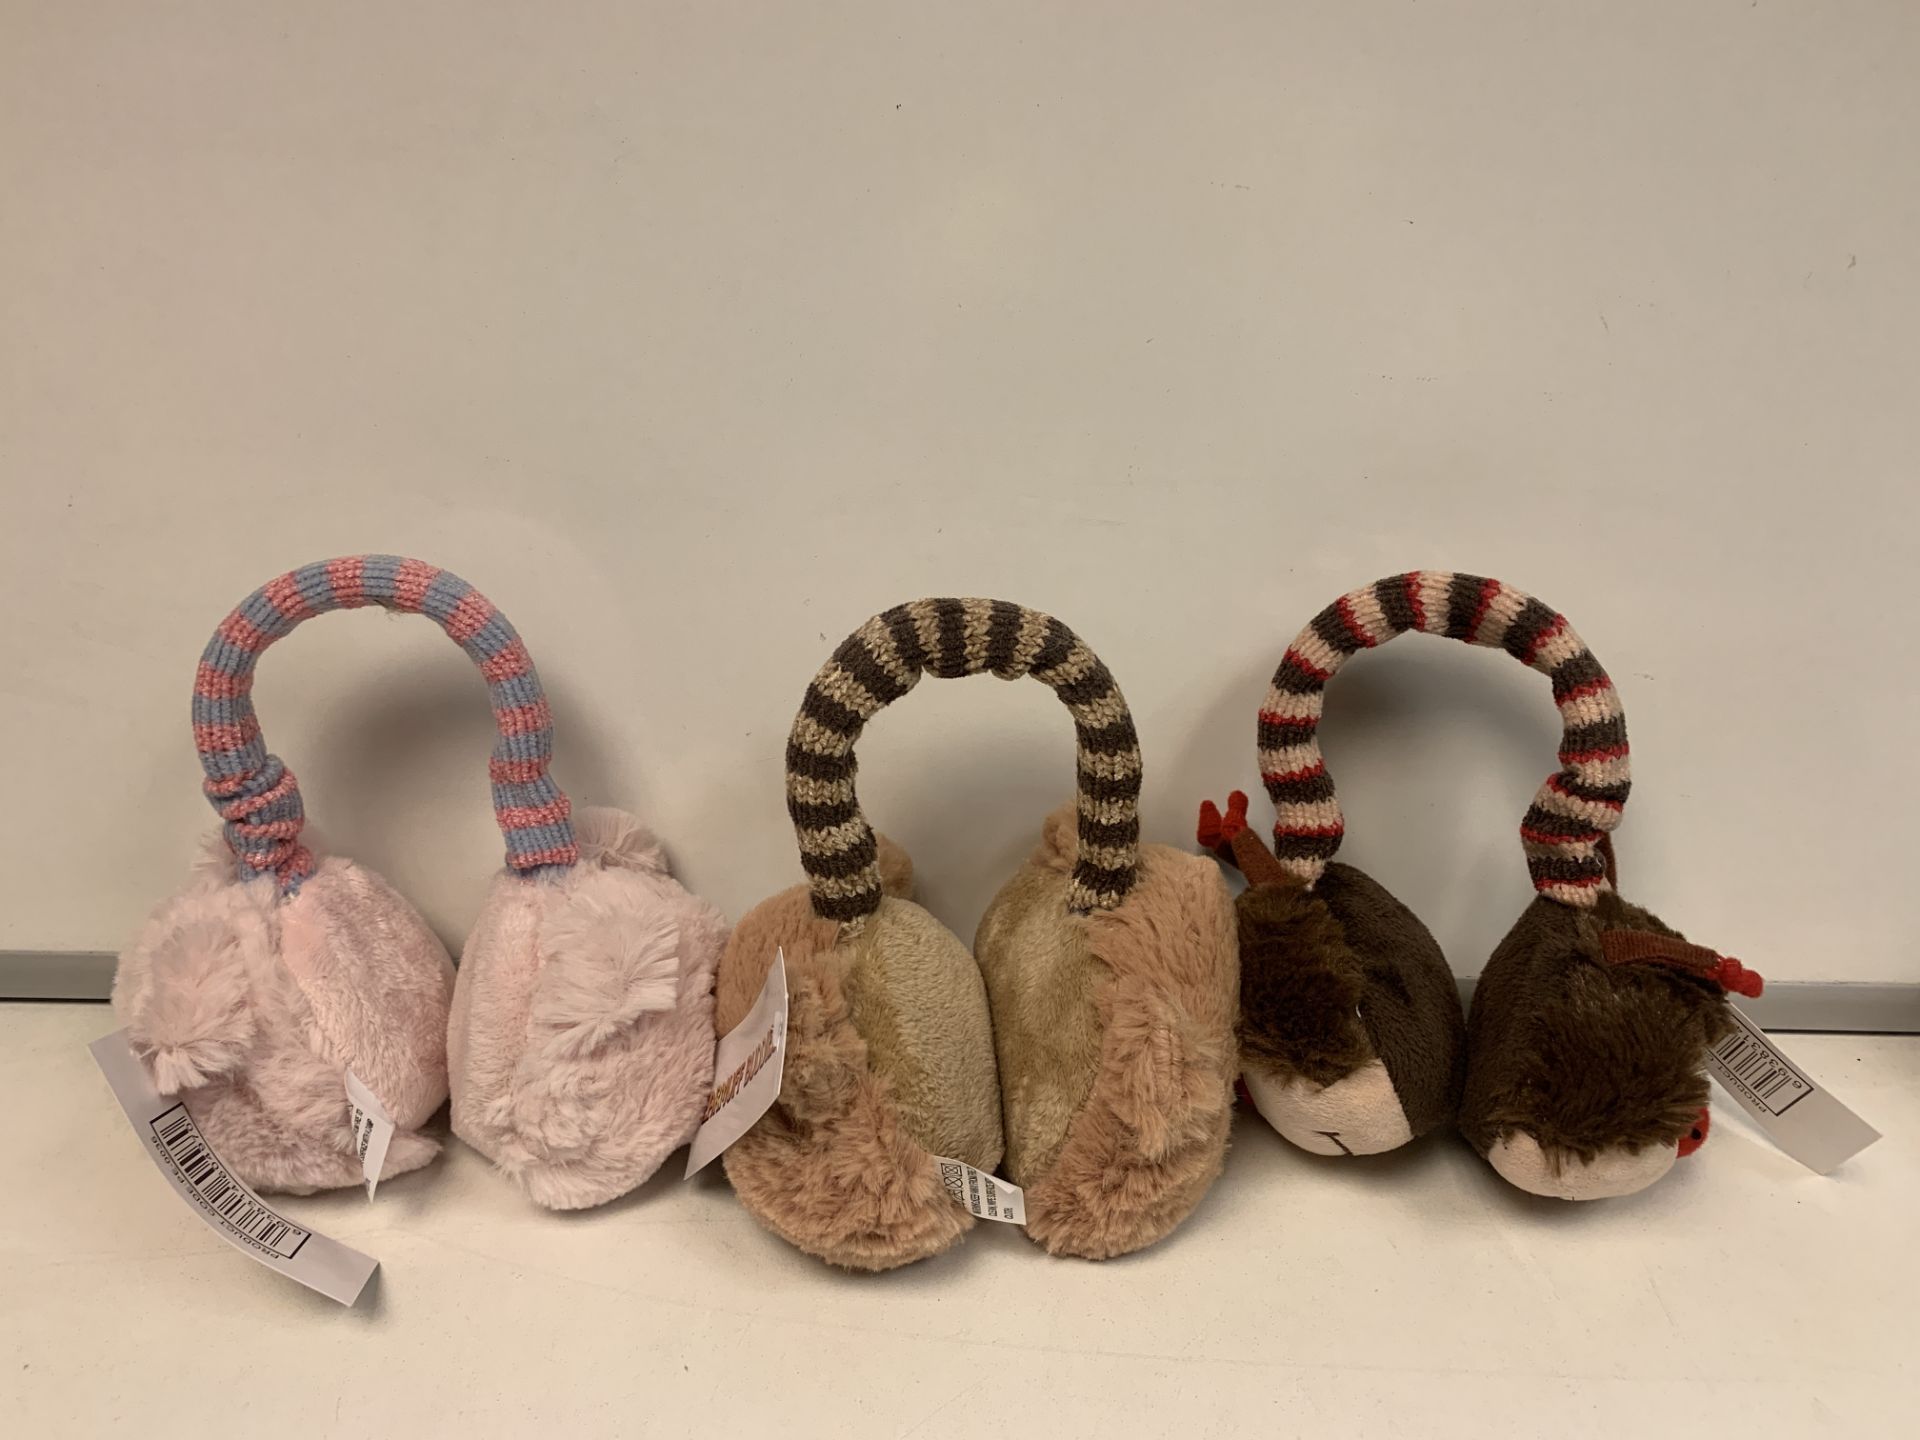 36 X NEW TAGGED FALCON ANIMAL EARMUFF BUDDIES. SUPER SOFT PLUSH WITH PADDING FOR EXTRA COMFORT